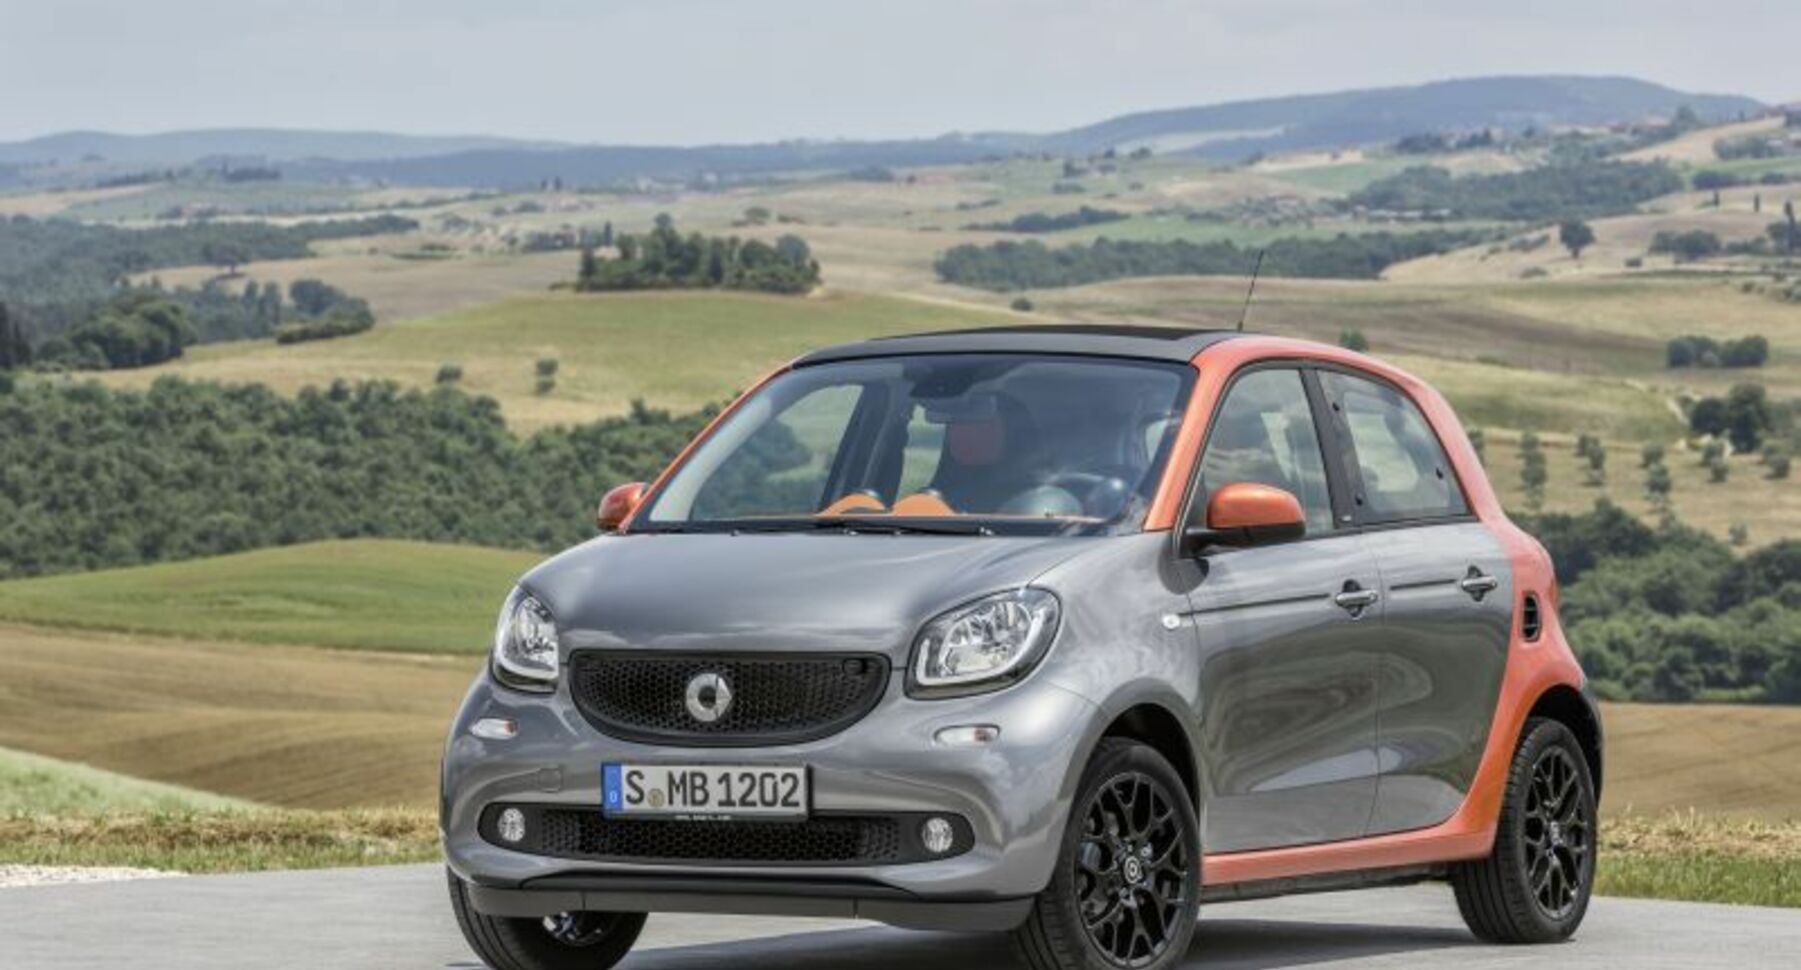 Smart Forfour II (W453) 0.9 (90 Hp) Automatic 2014, 2015, 2016, 2017, 2018, 2019